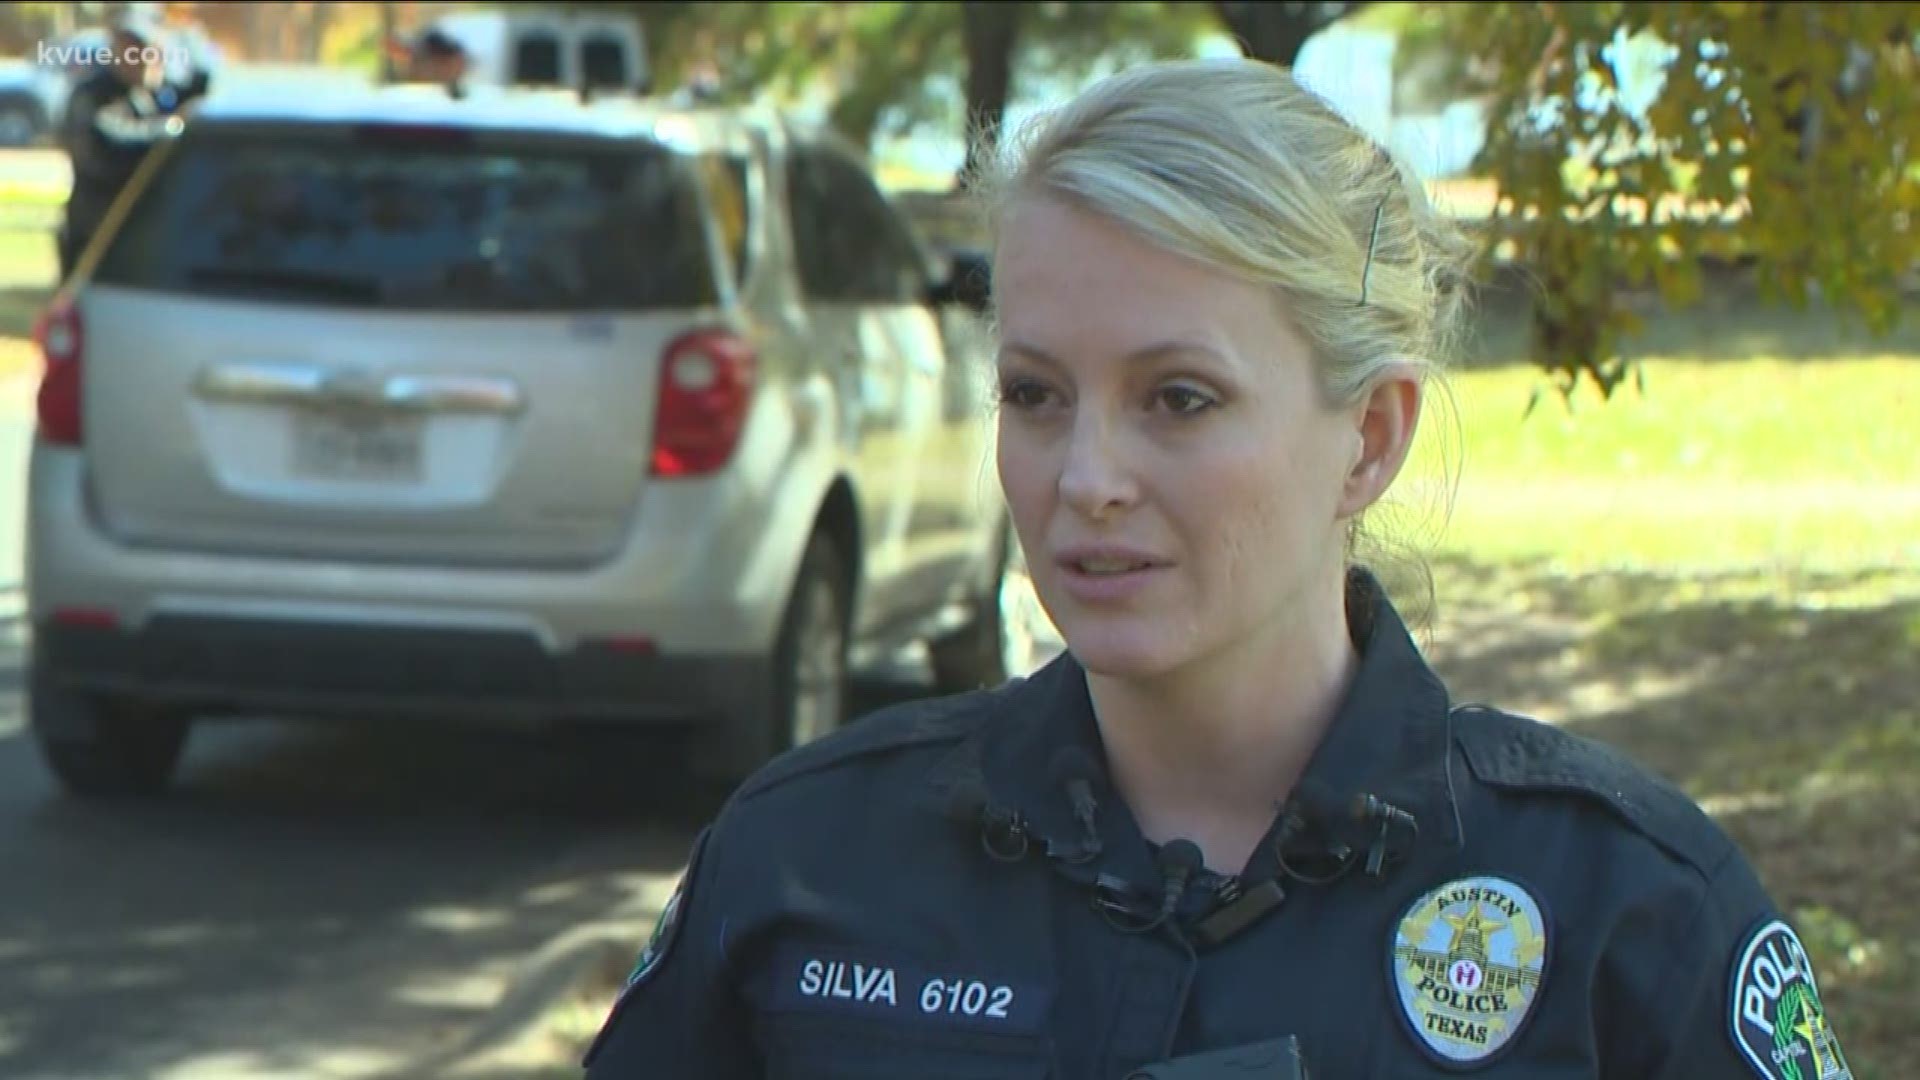 Hear the latest updates from the Austin Police Department about the body that was found in the Colorado River Monday morning.